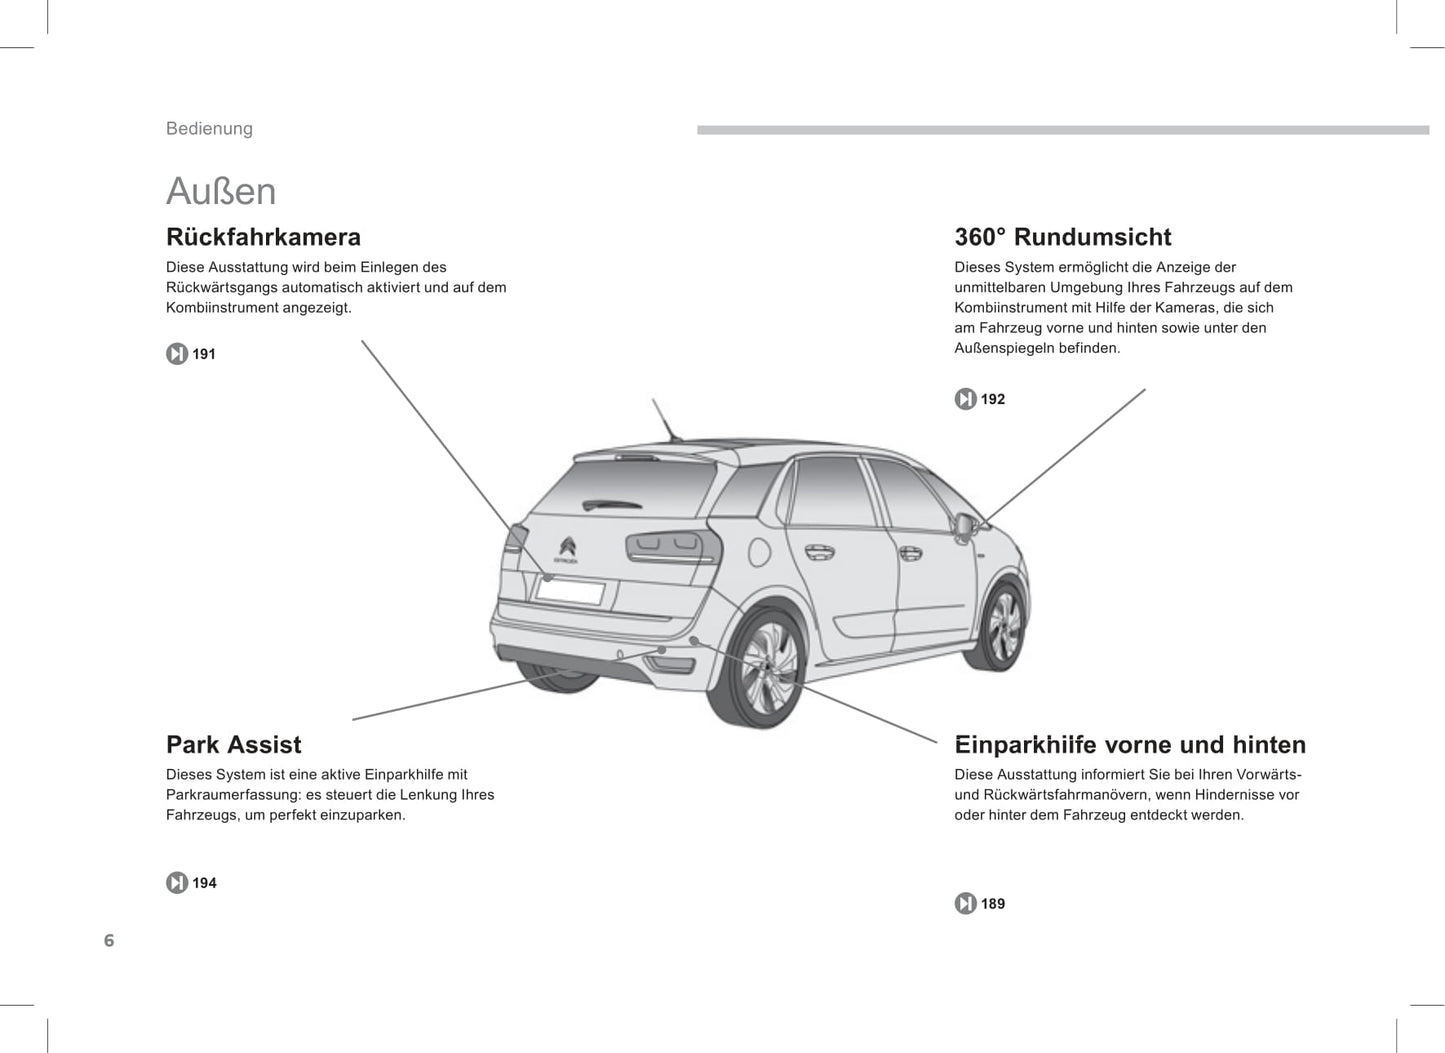 2013-2014 Citroën C4 Picasso/Grand C4 Picasso Owner's Manual | German